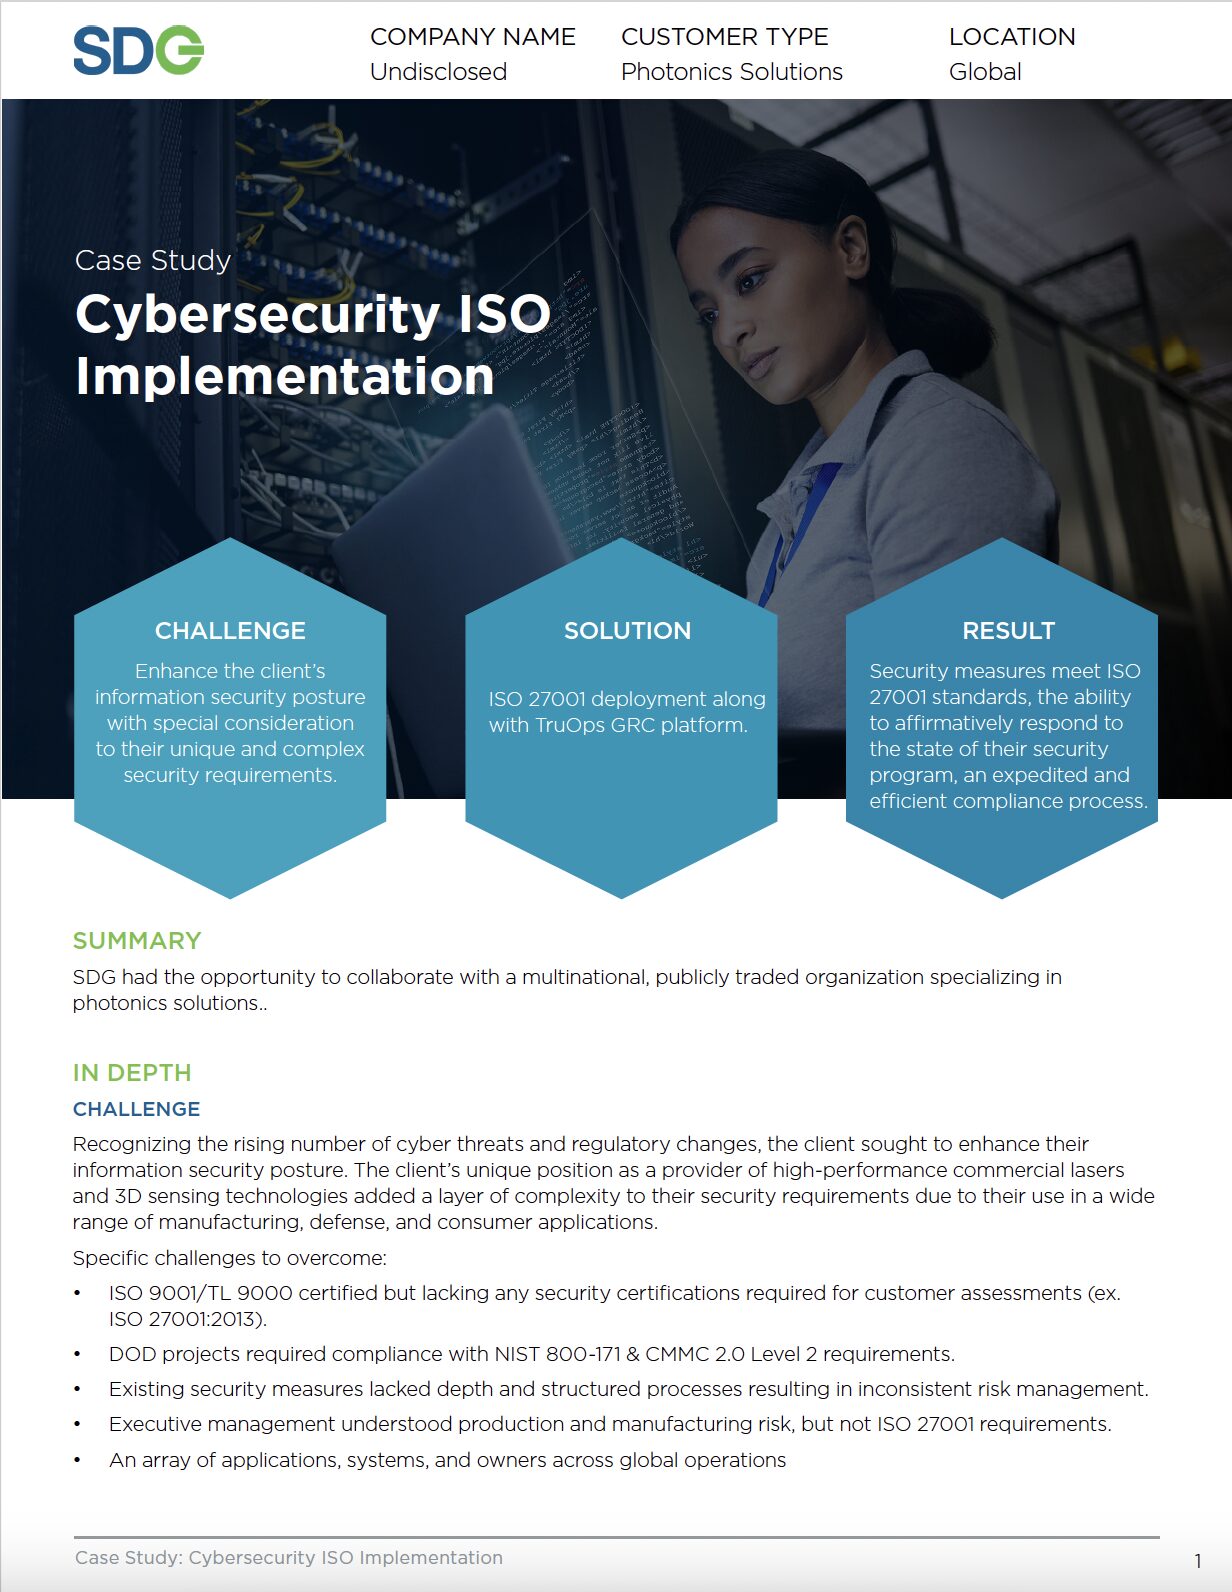 SDG Case Study - Cybersecurity ISO Implementation (Thumbnail)